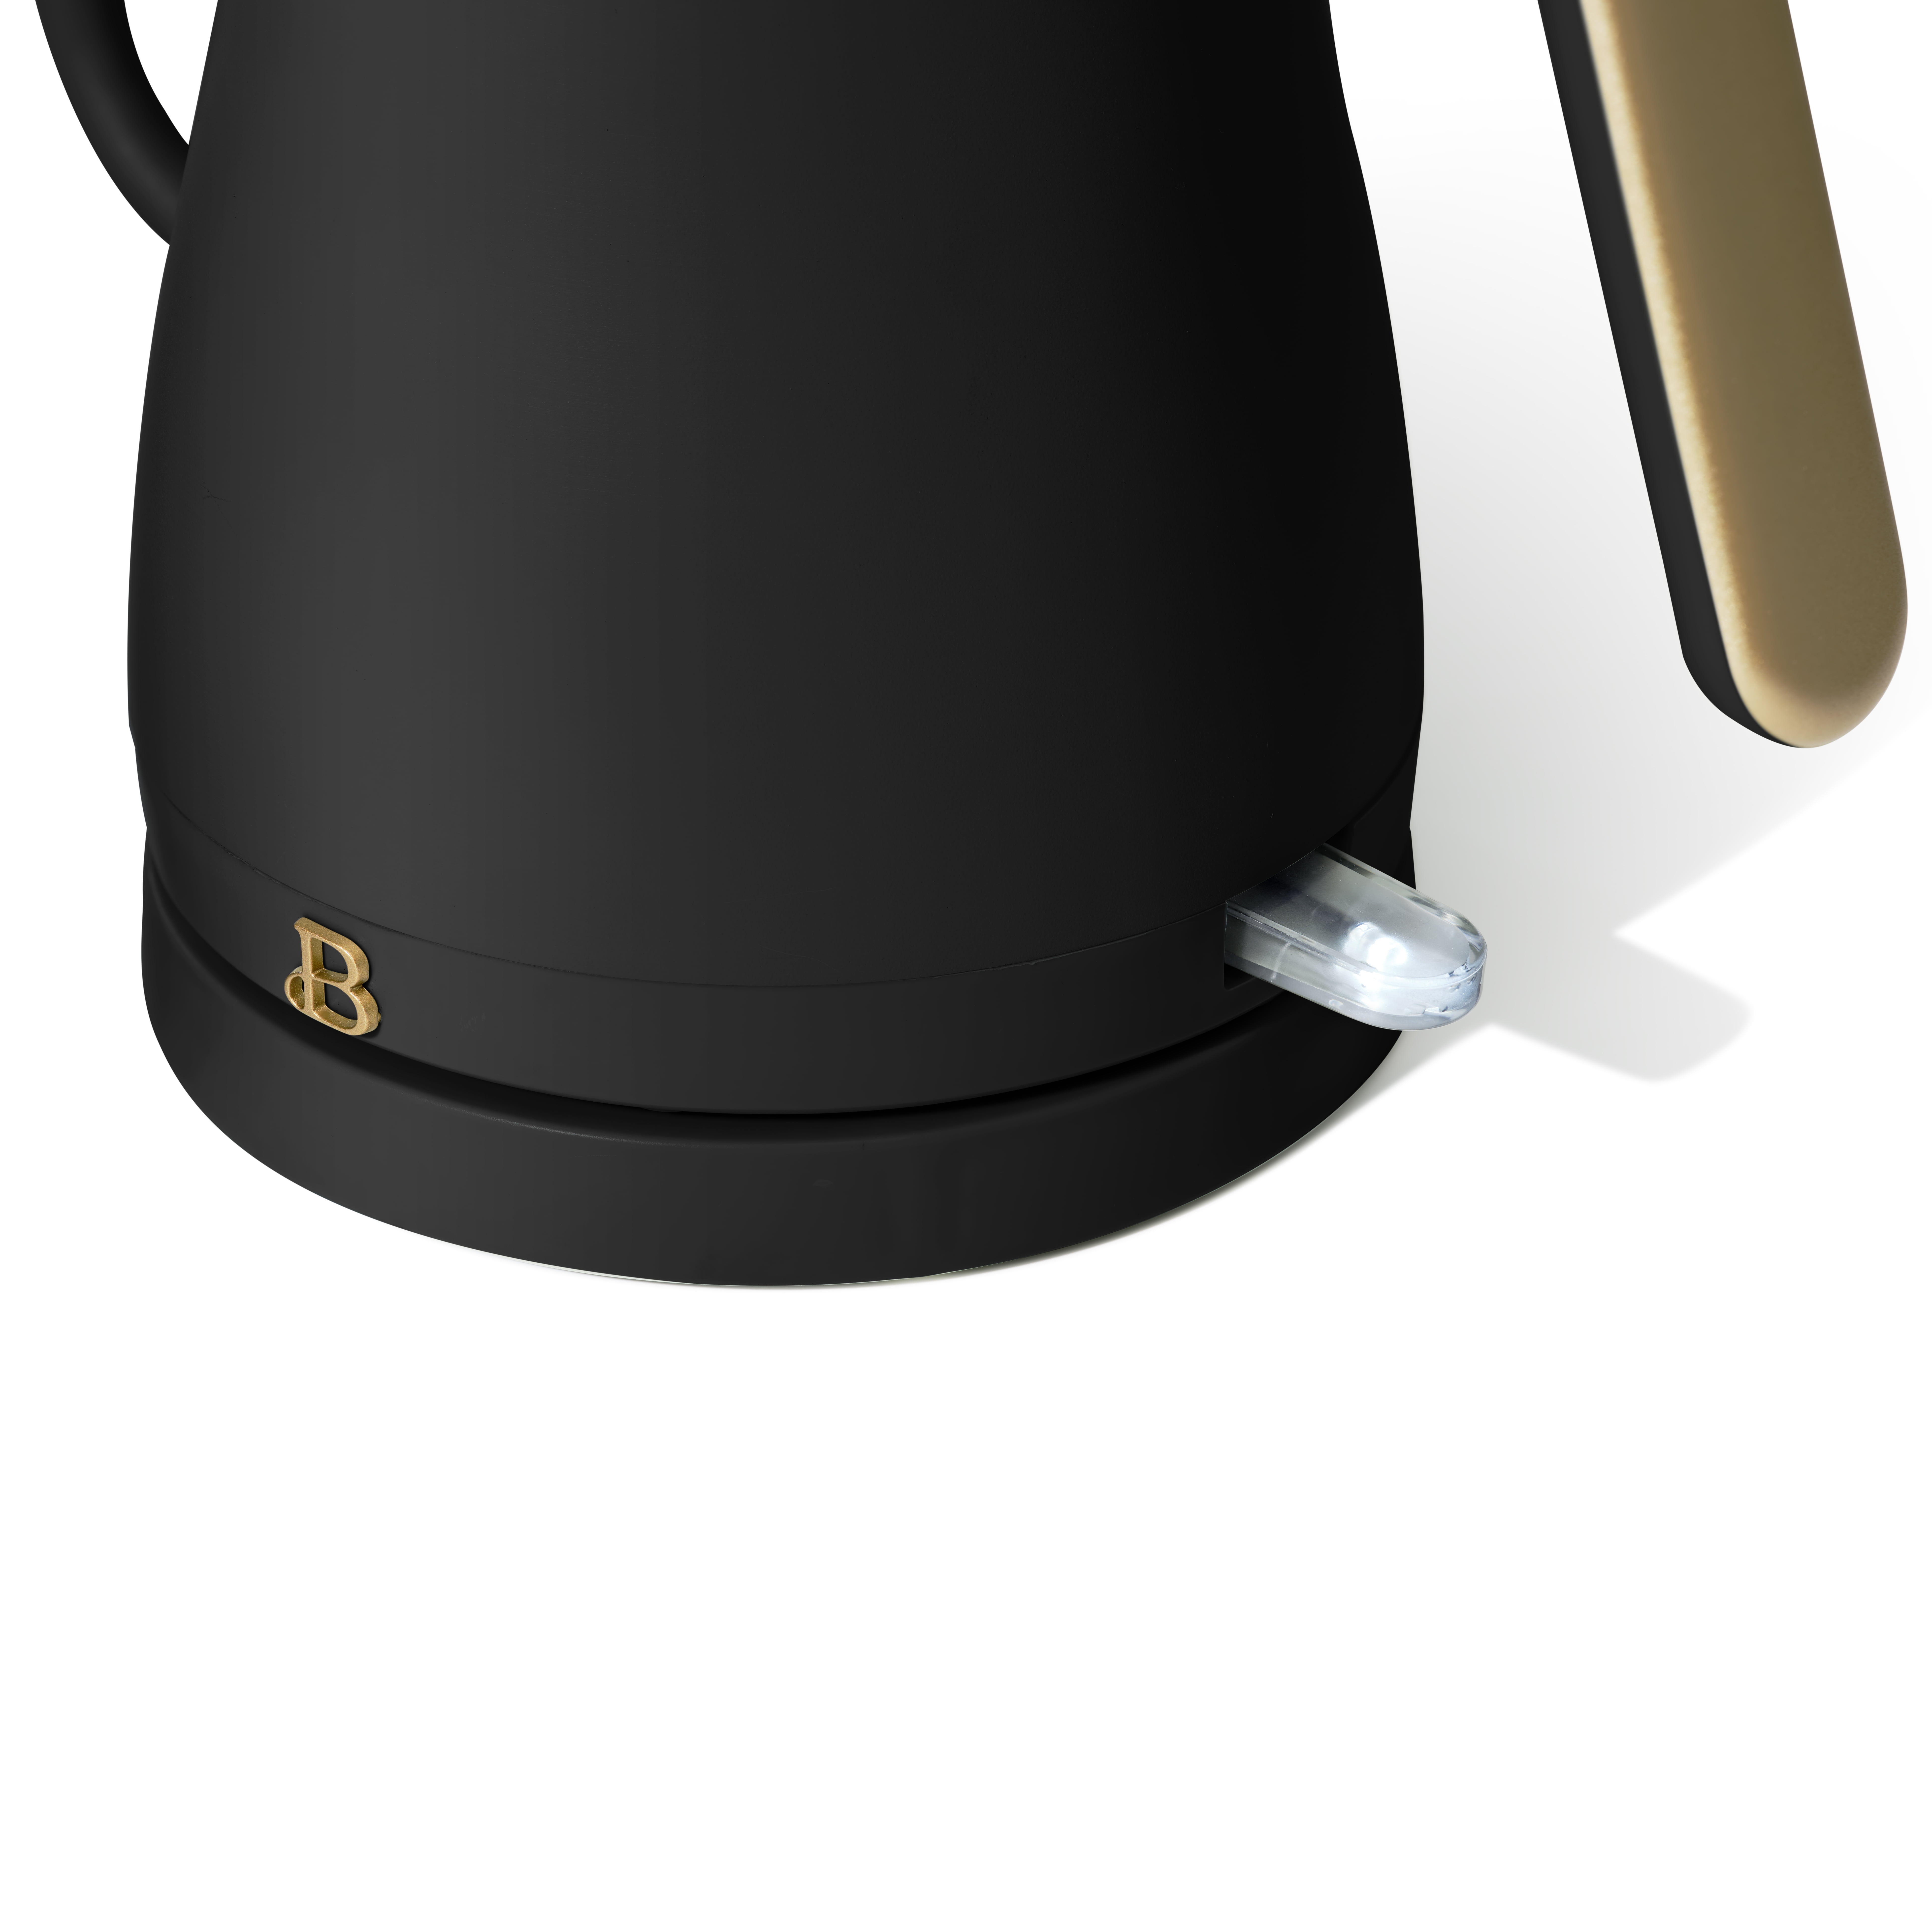 Beautiful 1-Liter Electric Gooseneck Kettle 1200 W, White Icing by Drew  Barrymore 